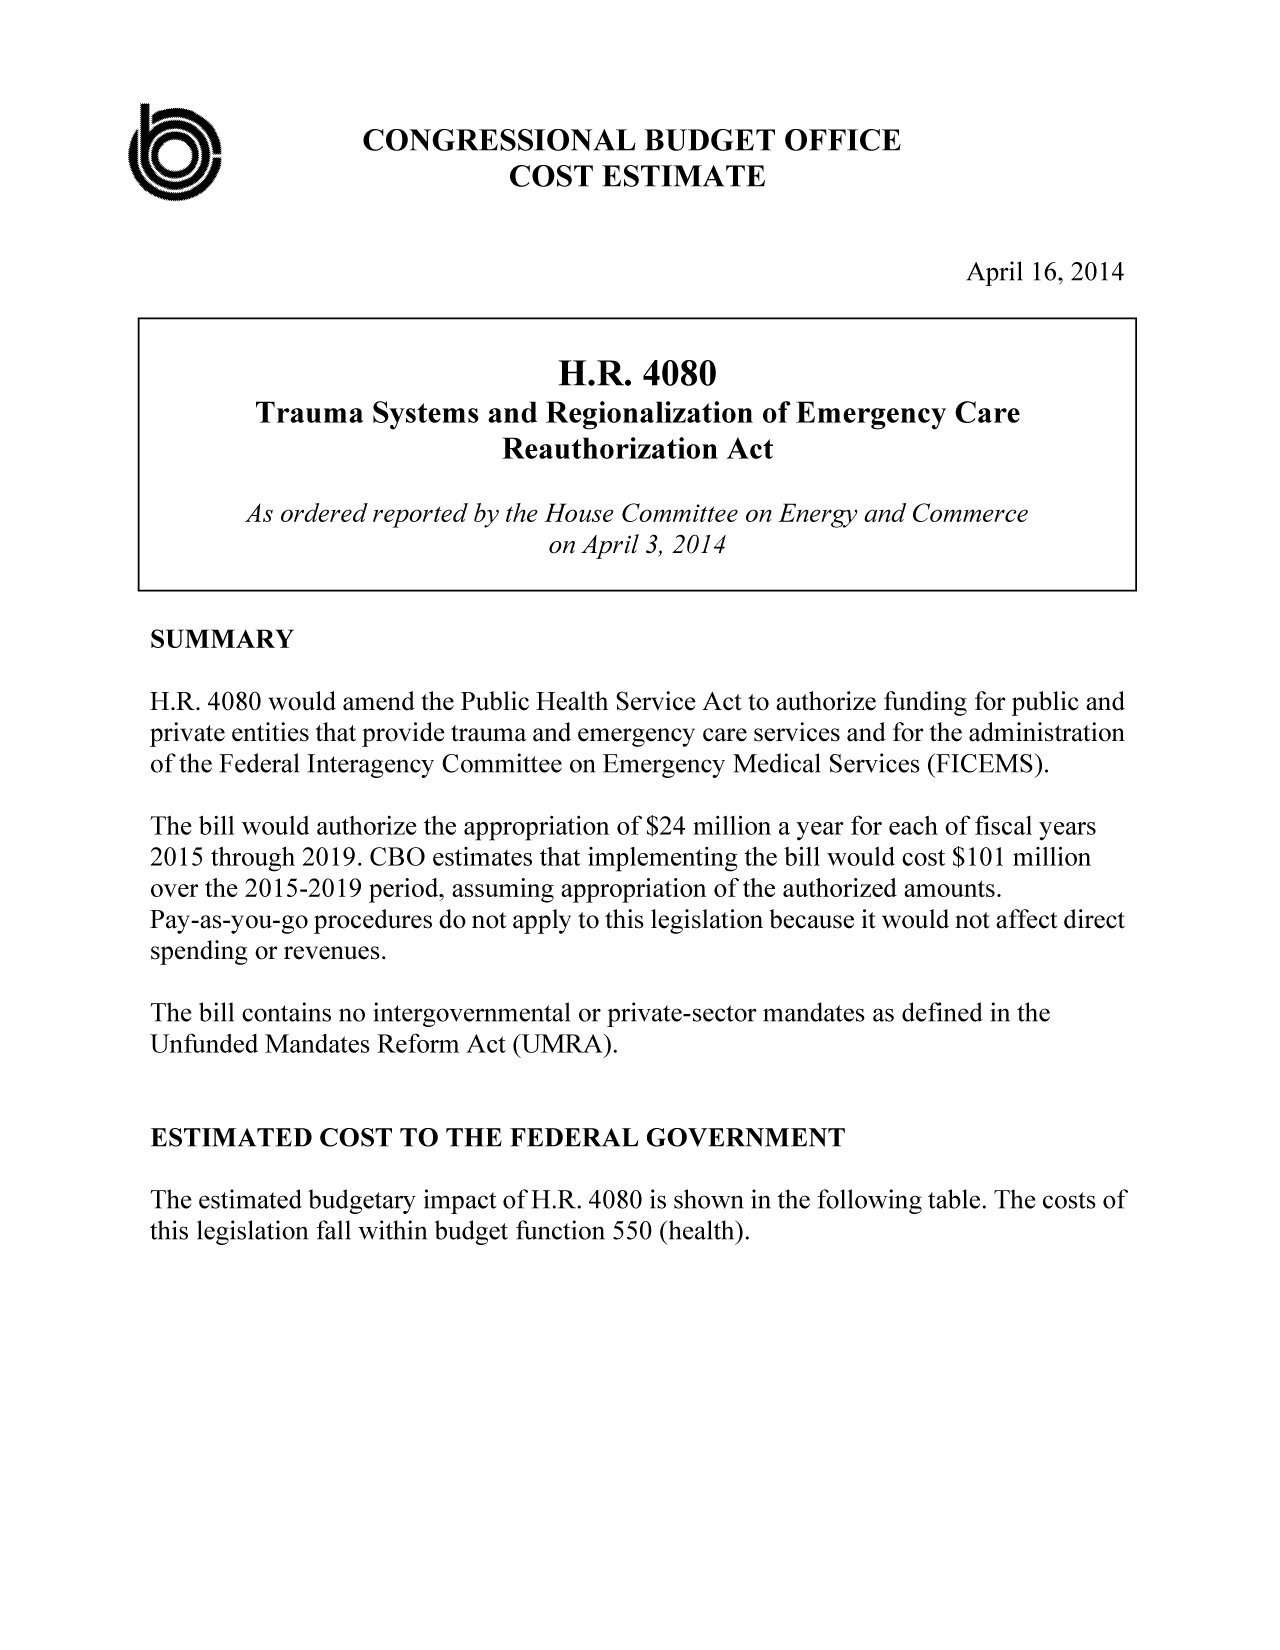 handle is hein.congrec/cbo1607 and id is 1 raw text is: CONGRESSIONAL BUDGET OFFICE
COST ESTIMATE

April 16, 2014

H.R. 4080
Trauma Systems and Regionalization of Emergency Care
Reauthorization Act
As ordered reported by the House Committee on Energy and Commerce
on April 3, 2014
SUMMARY
H.R. 4080 would amend the Public Health Service Act to authorize funding for public and
private entities that provide trauma and emergency care services and for the administration
of the Federal Interagency Committee on Emergency Medical Services (FICEMS).
The bill would authorize the appropriation of $24 million a year for each of fiscal years
2015 through 2019. CBO estimates that implementing the bill would cost $101 million
over the 2015-2019 period, assuming appropriation of the authorized amounts.
Pay-as-you-go procedures do not apply to this legislation because it would not affect direct
spending or revenues.
The bill contains no intergovernmental or private-sector mandates as defined in the
Unfunded Mandates Reform Act (UMRA).
ESTIMATED COST TO THE FEDERAL GOVERNMENT
The estimated budgetary impact of H.R. 4080 is shown in the following table. The costs of
this legislation fall within budget function 550 (health).

a


